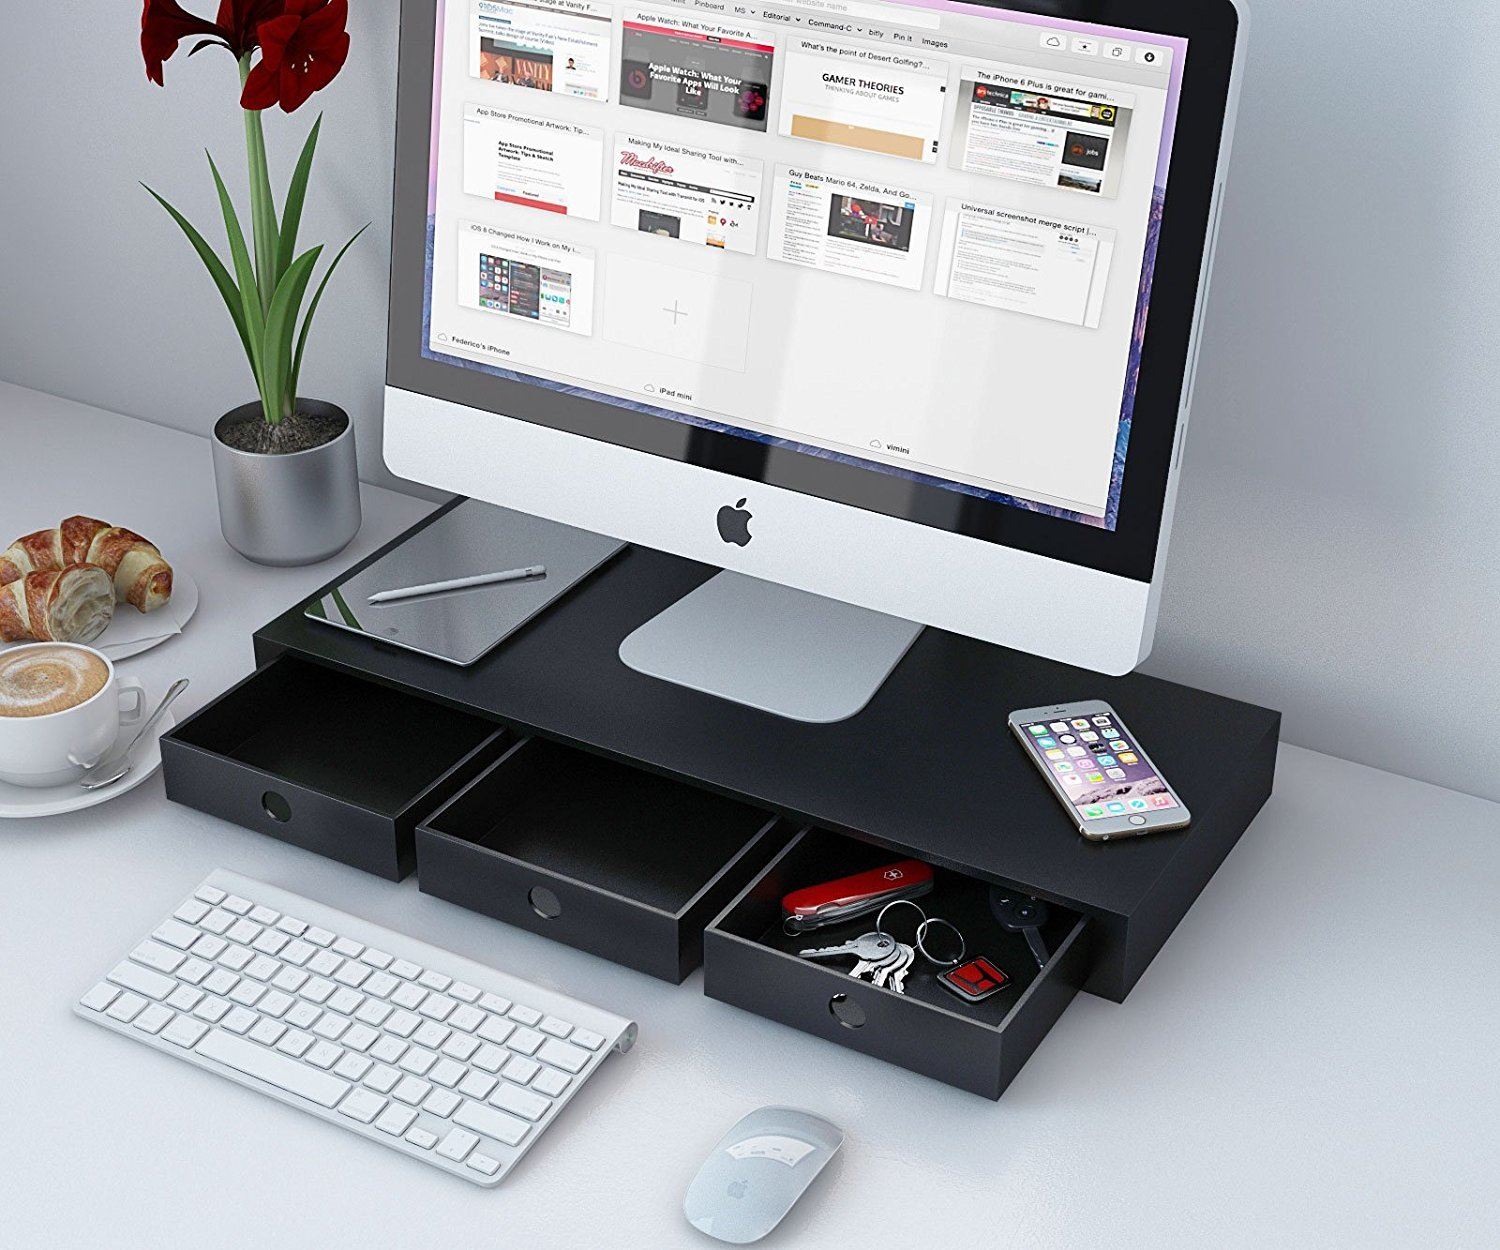 10 Cool Office Gadgets That Will Make Your Work Desk Organized And Boost Your Productivity